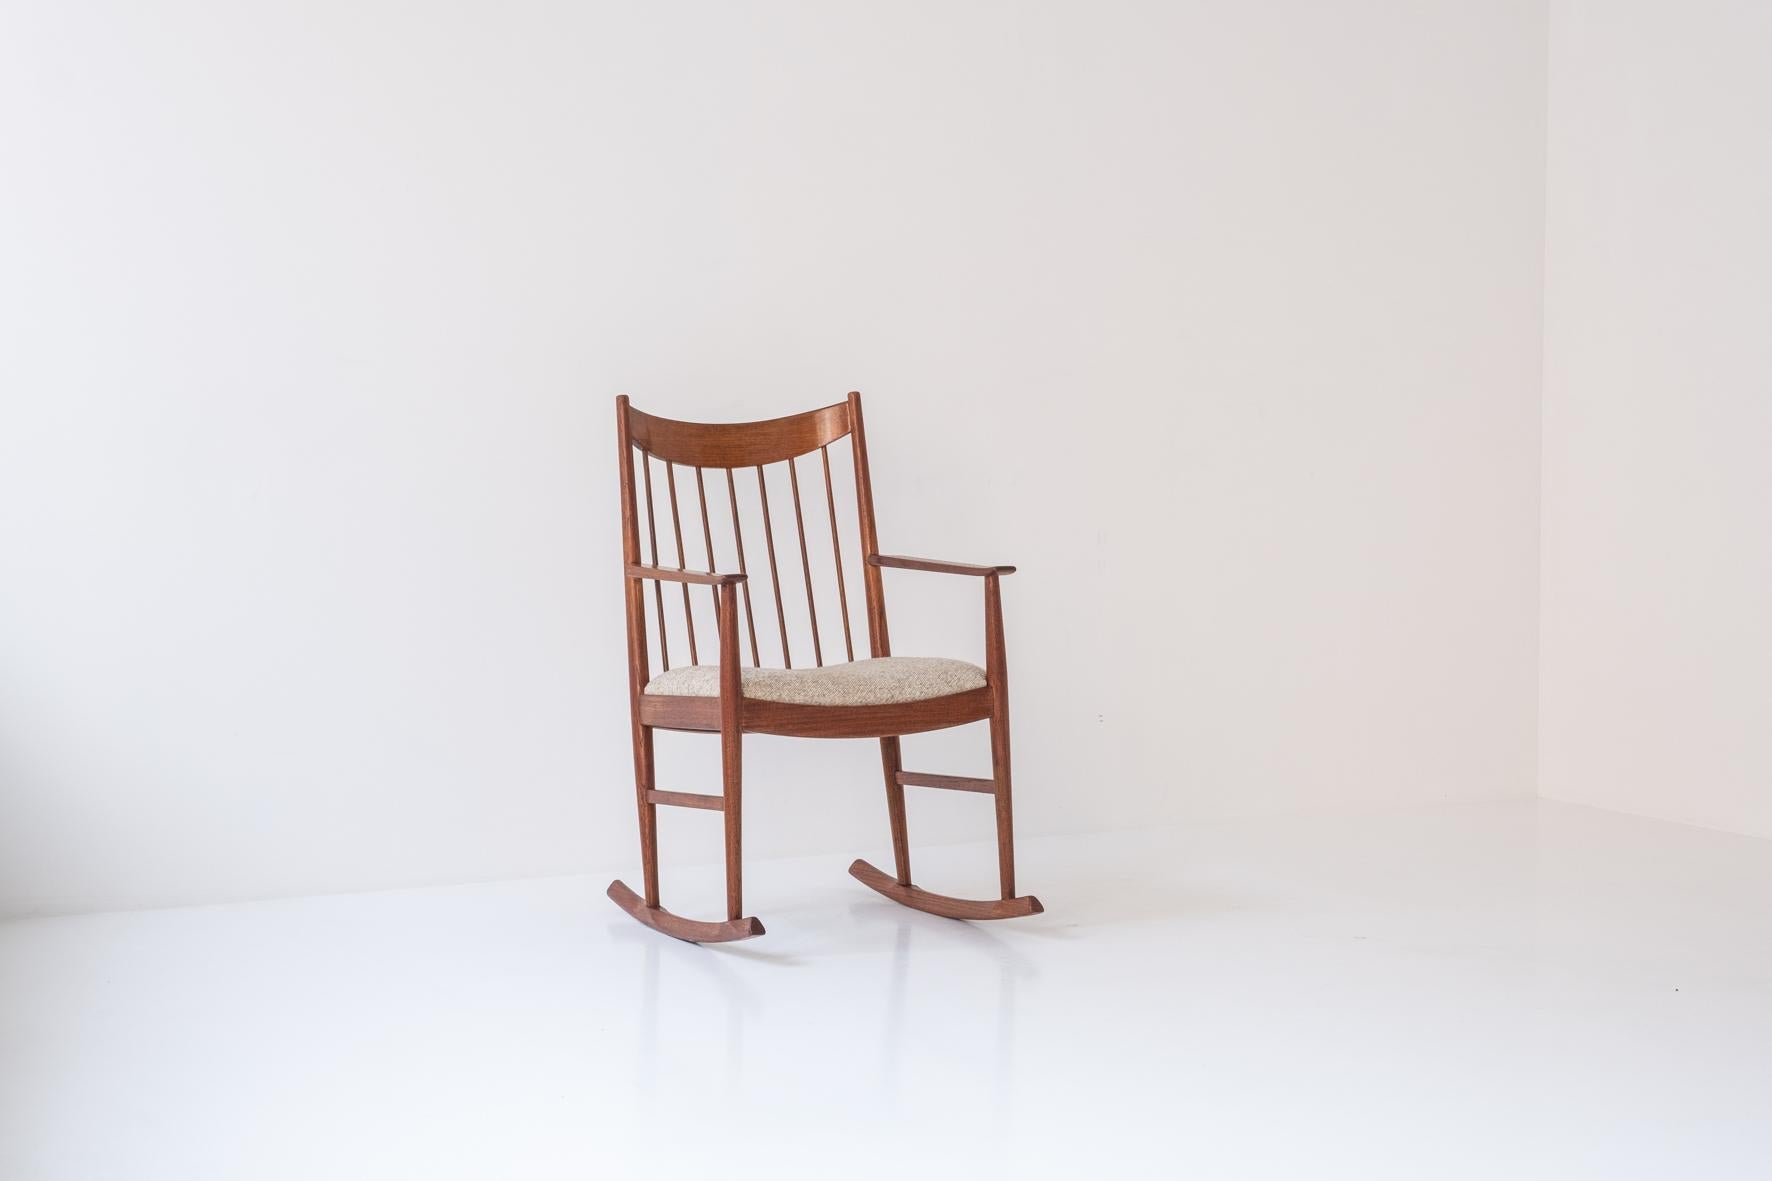 Rocking chair designed by Arne Vodder for Sibast, Denmark 1960s. This chair is made out of teak and has a curved spindle back rest.  The seating is upholstered with a wool fabric upholstery. Restored with love. Labeled underneath.